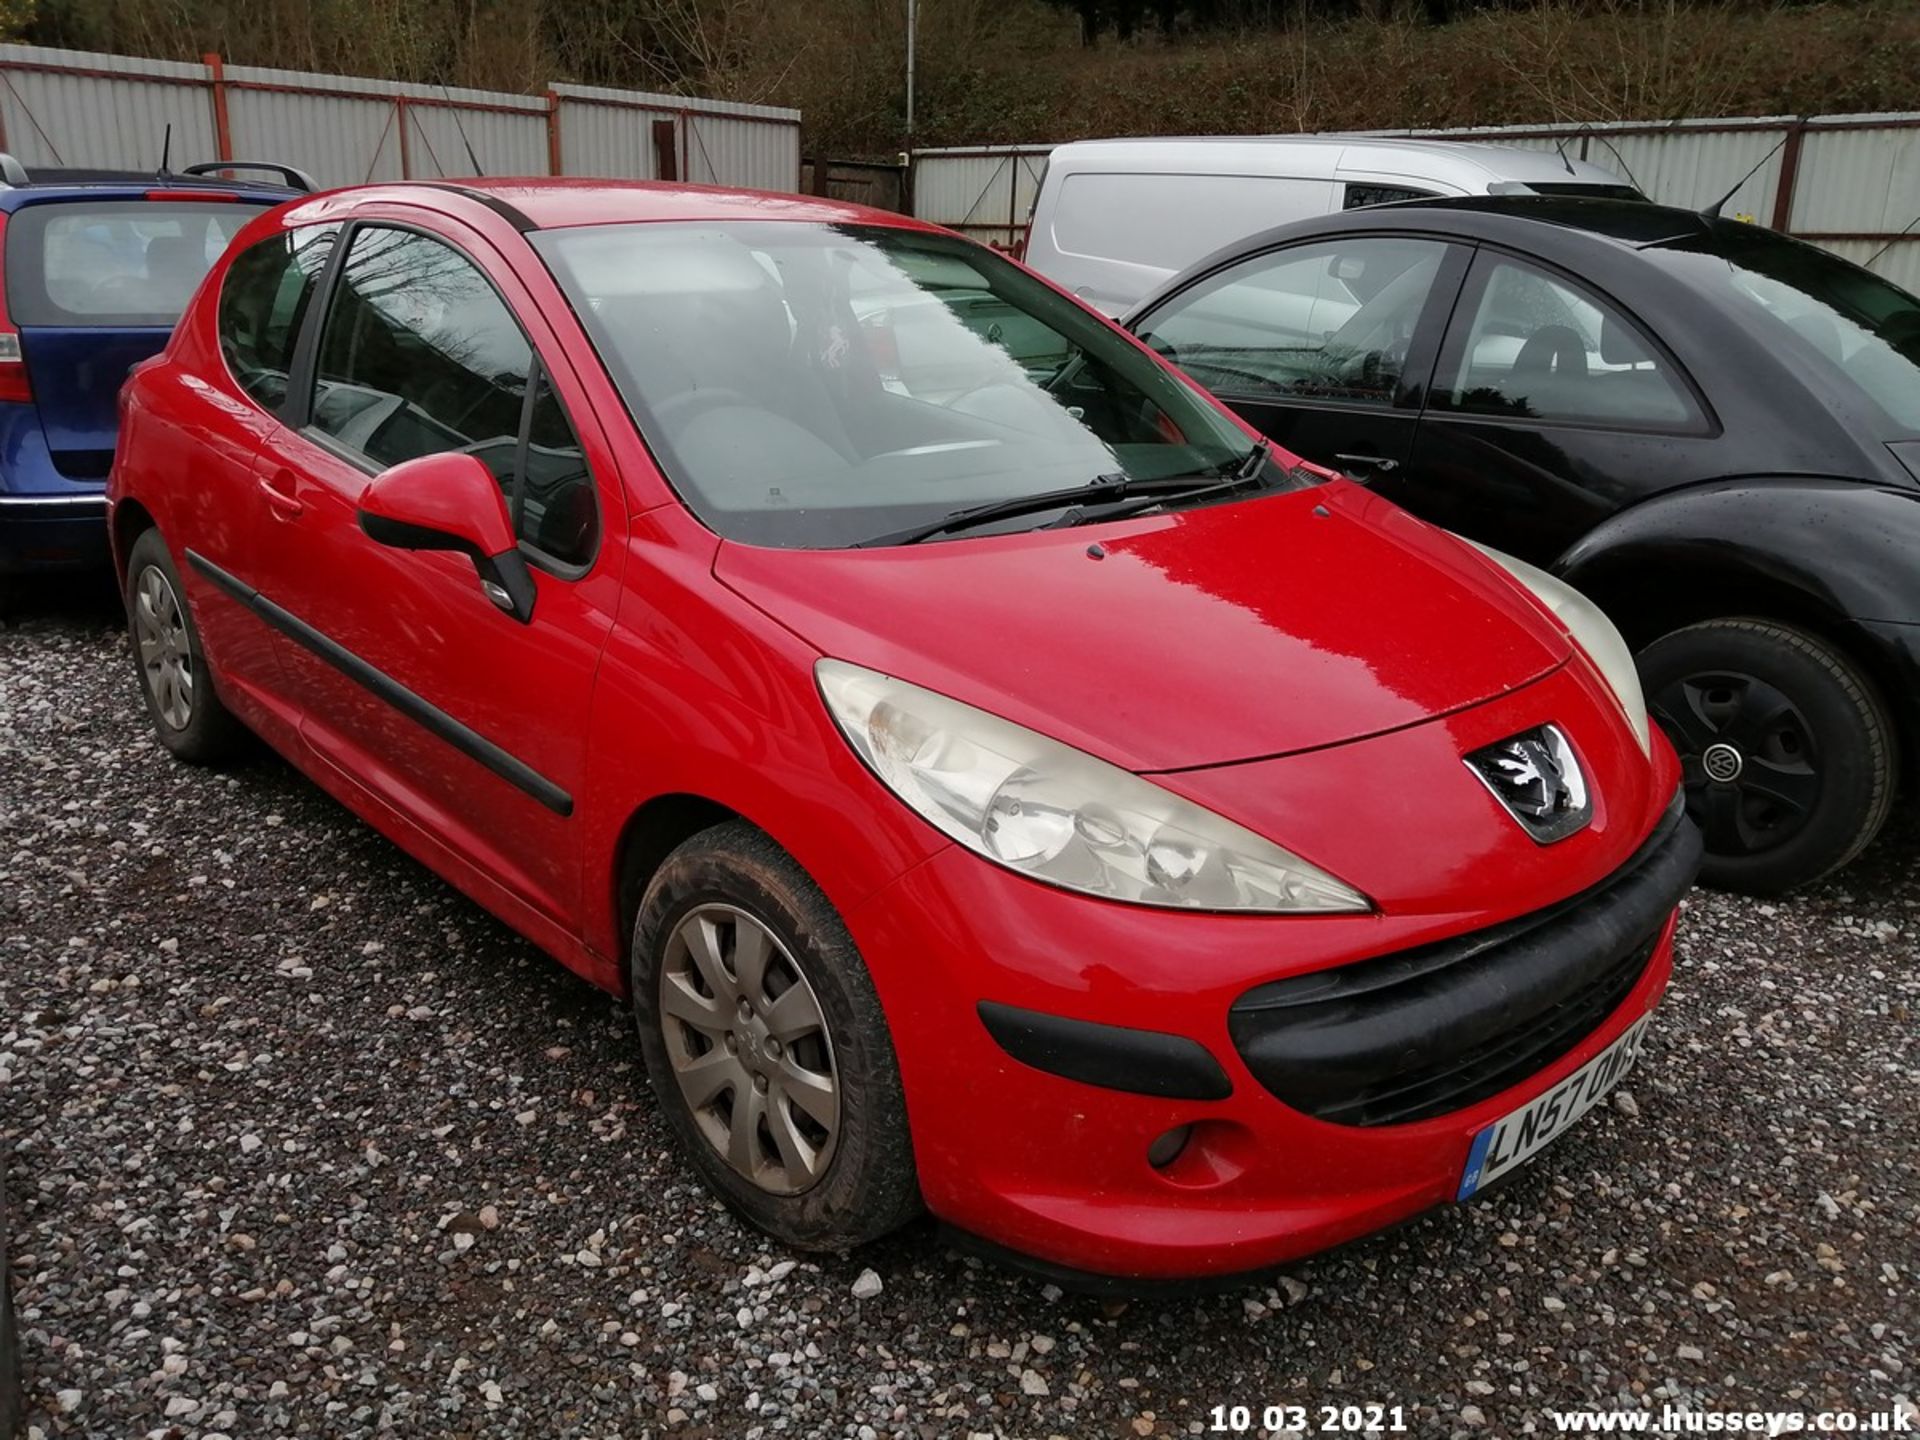 07/57 PEUGEOT 207 S HDI 67 - 1398cc 3dr Hatchback (Red) - Image 7 of 11